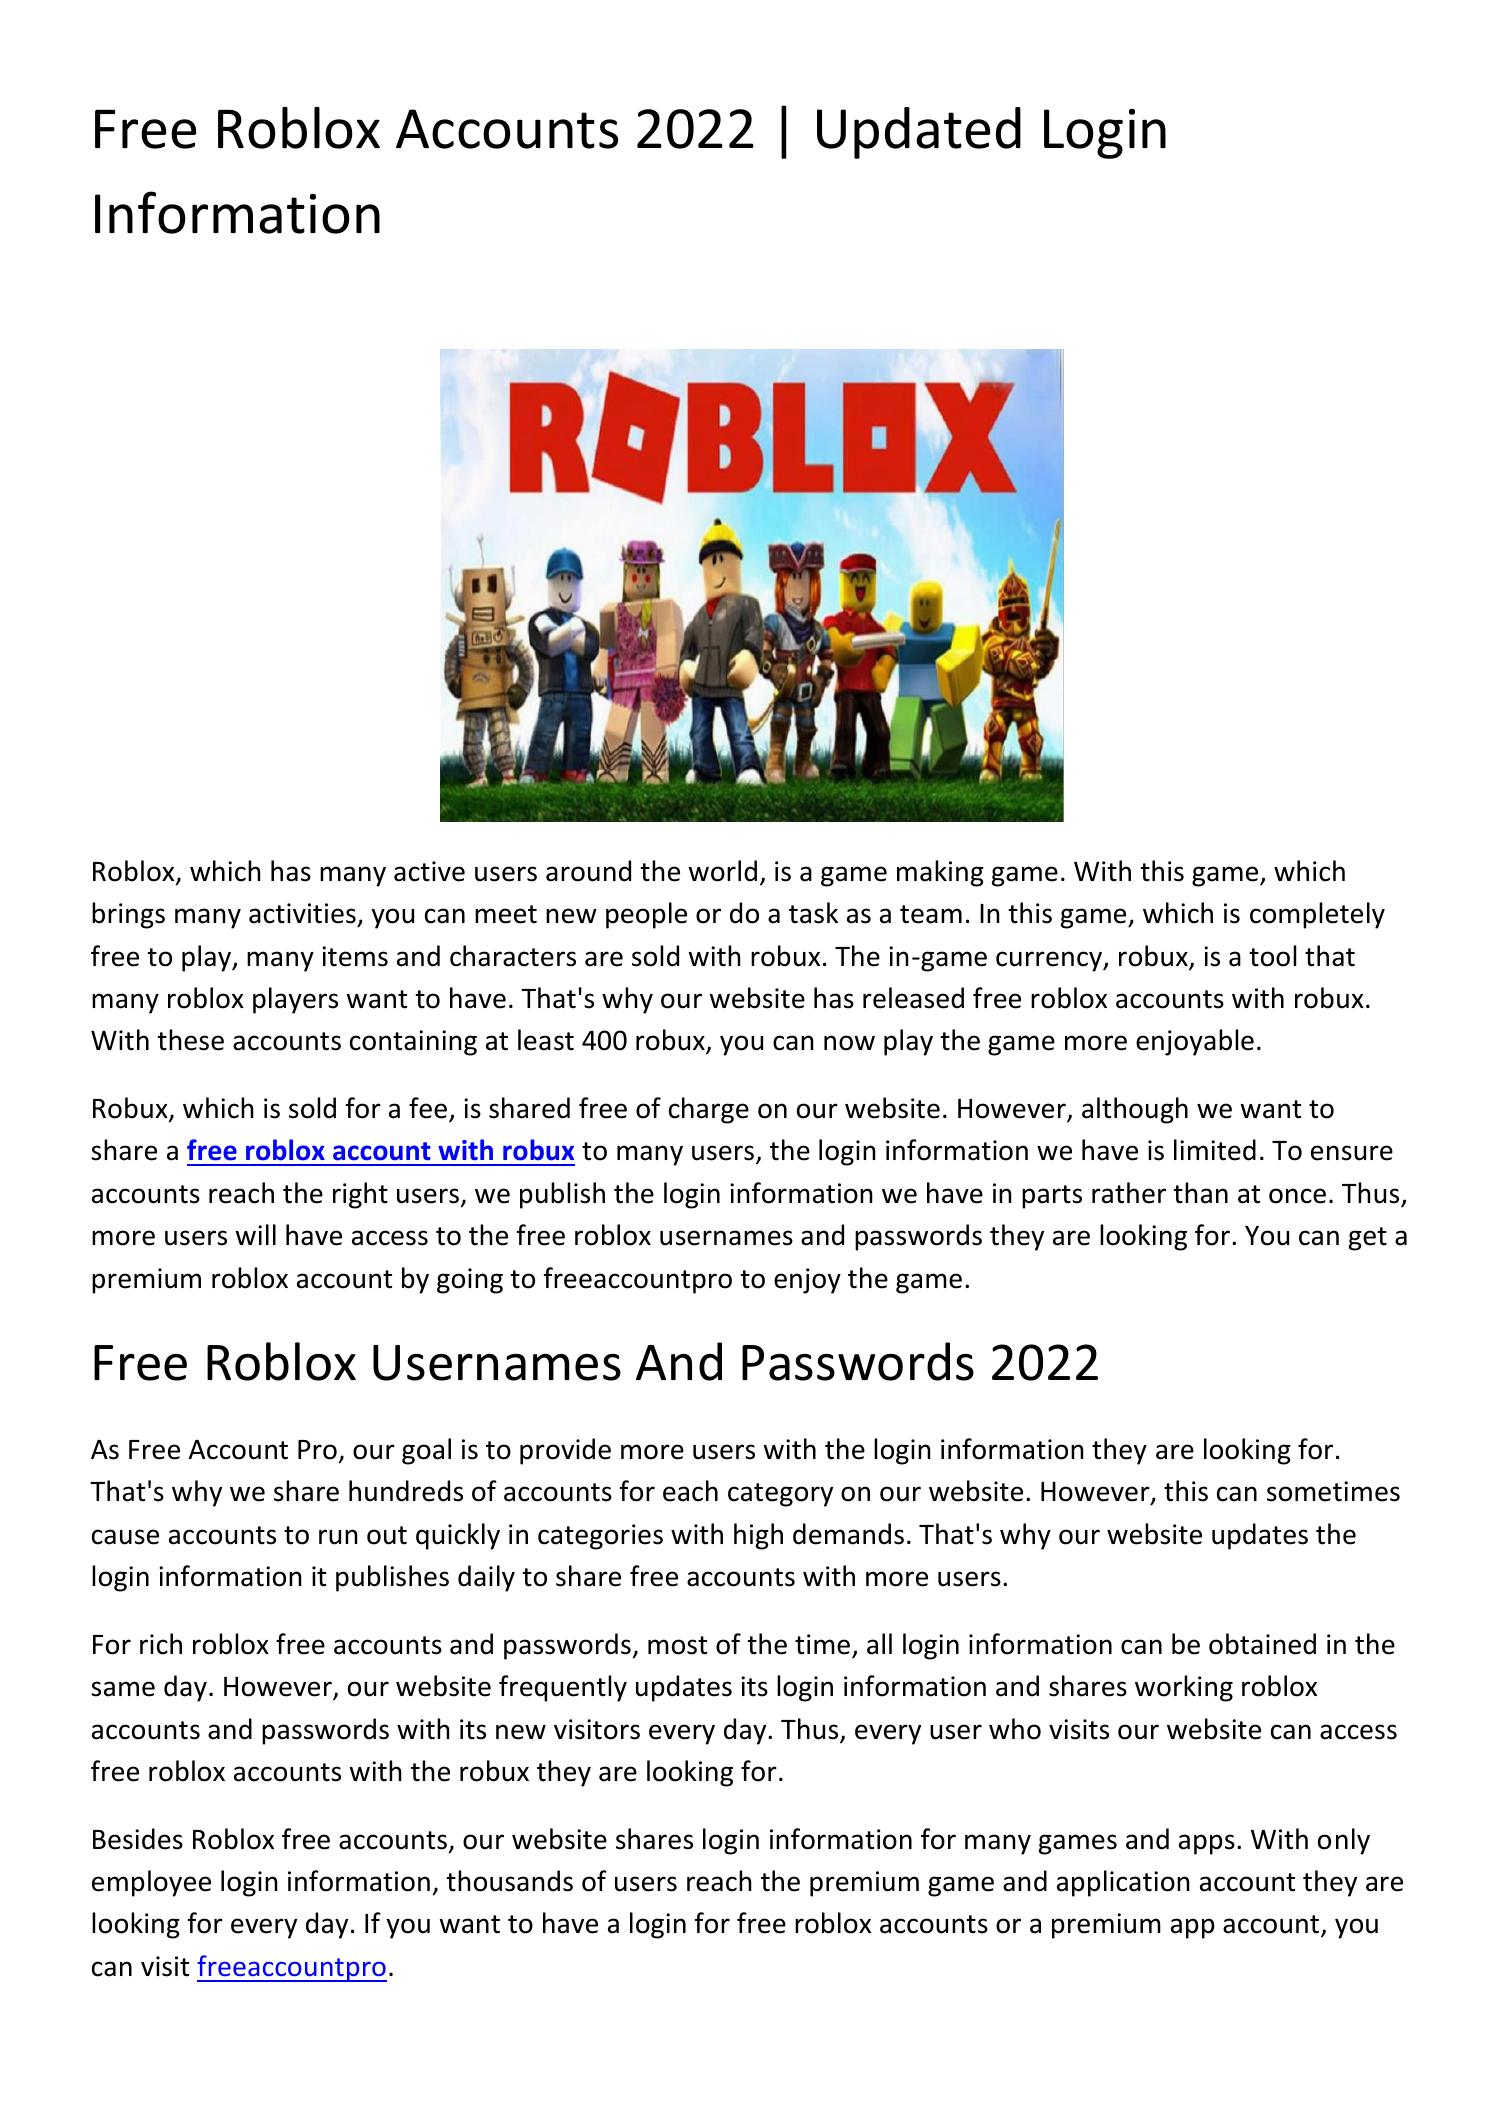 Roblox free account and password 2022.docx